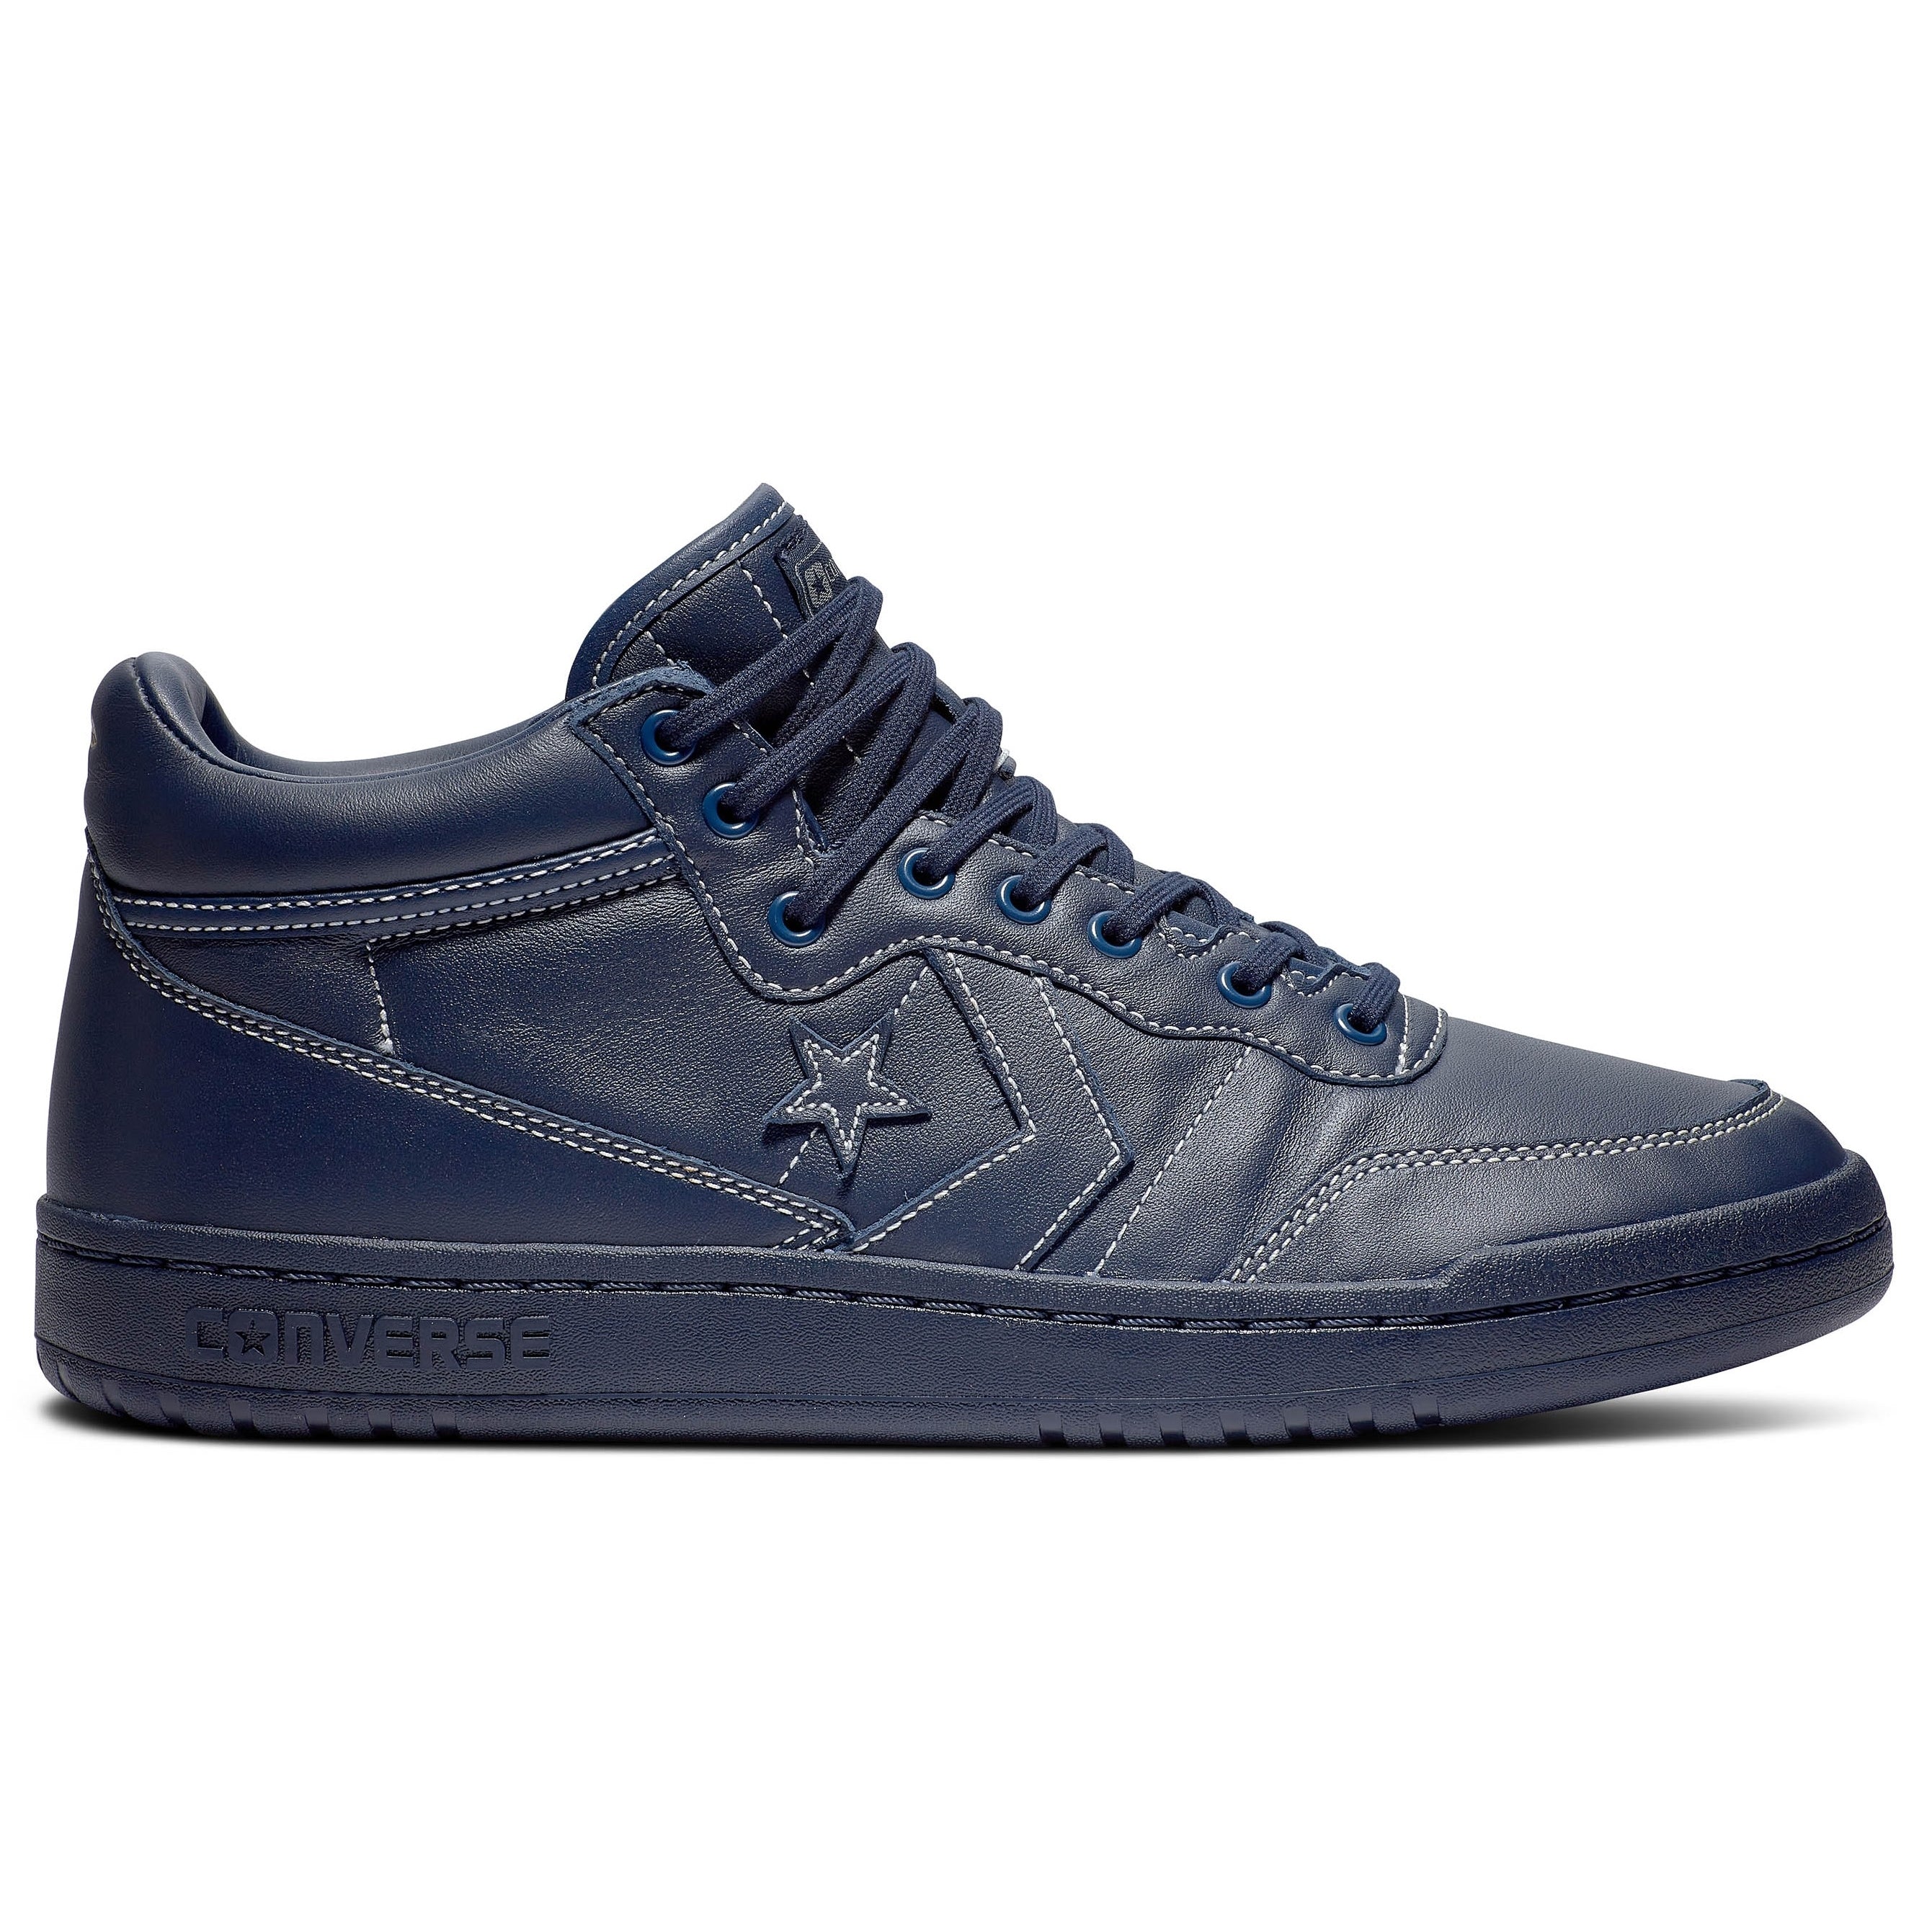 Converse Fastbreak Pro Mid Skate Shoe in Obsidian and Navy – I L O S P O R T